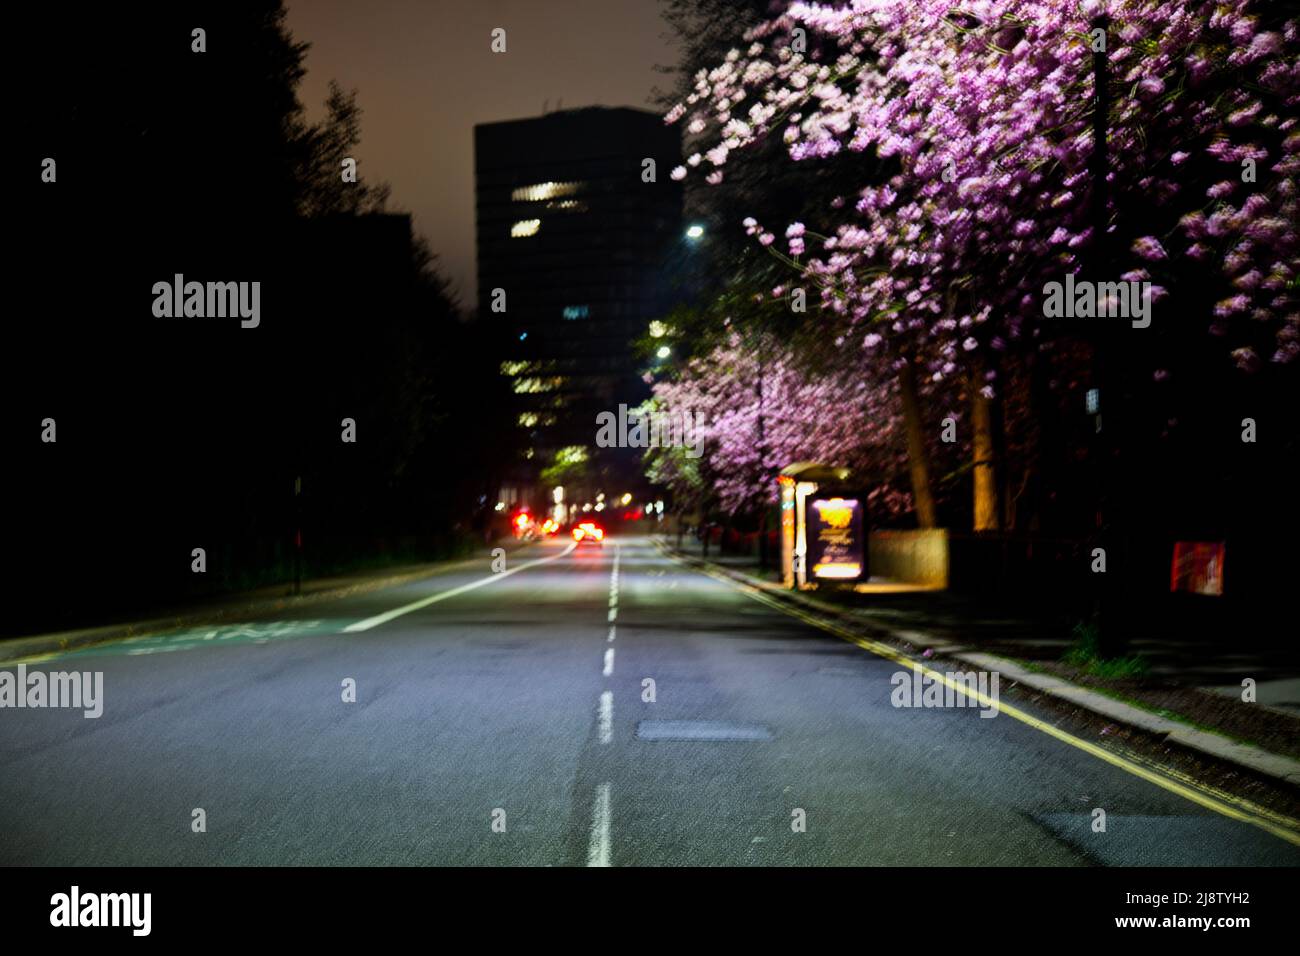 in the middle of a road or highway looking ahead during the night in a city, Uk Stock Photo